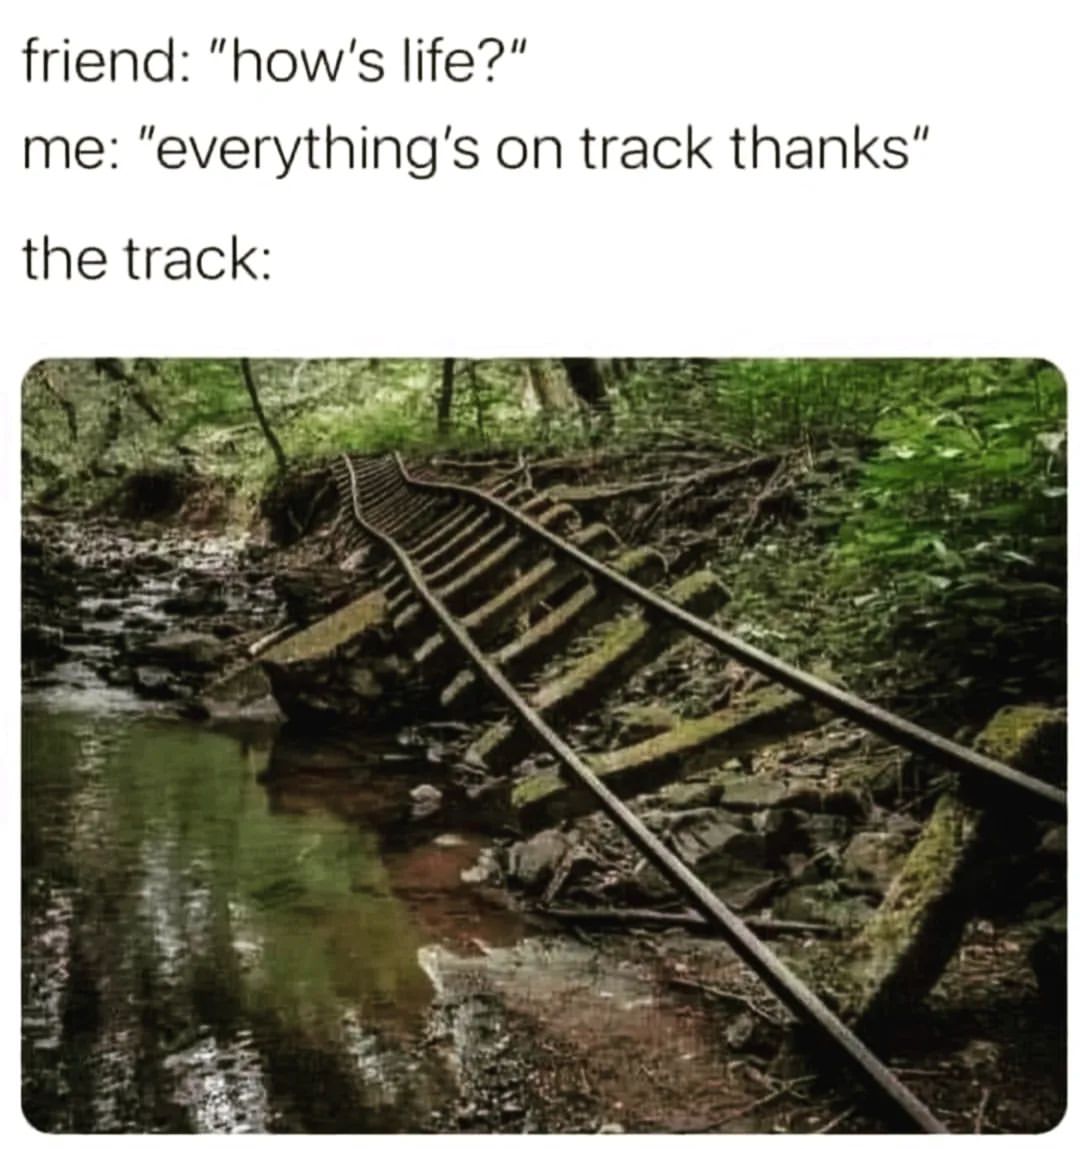 Friend: "How's life?" Me: "Everything's on track thanks" the track: